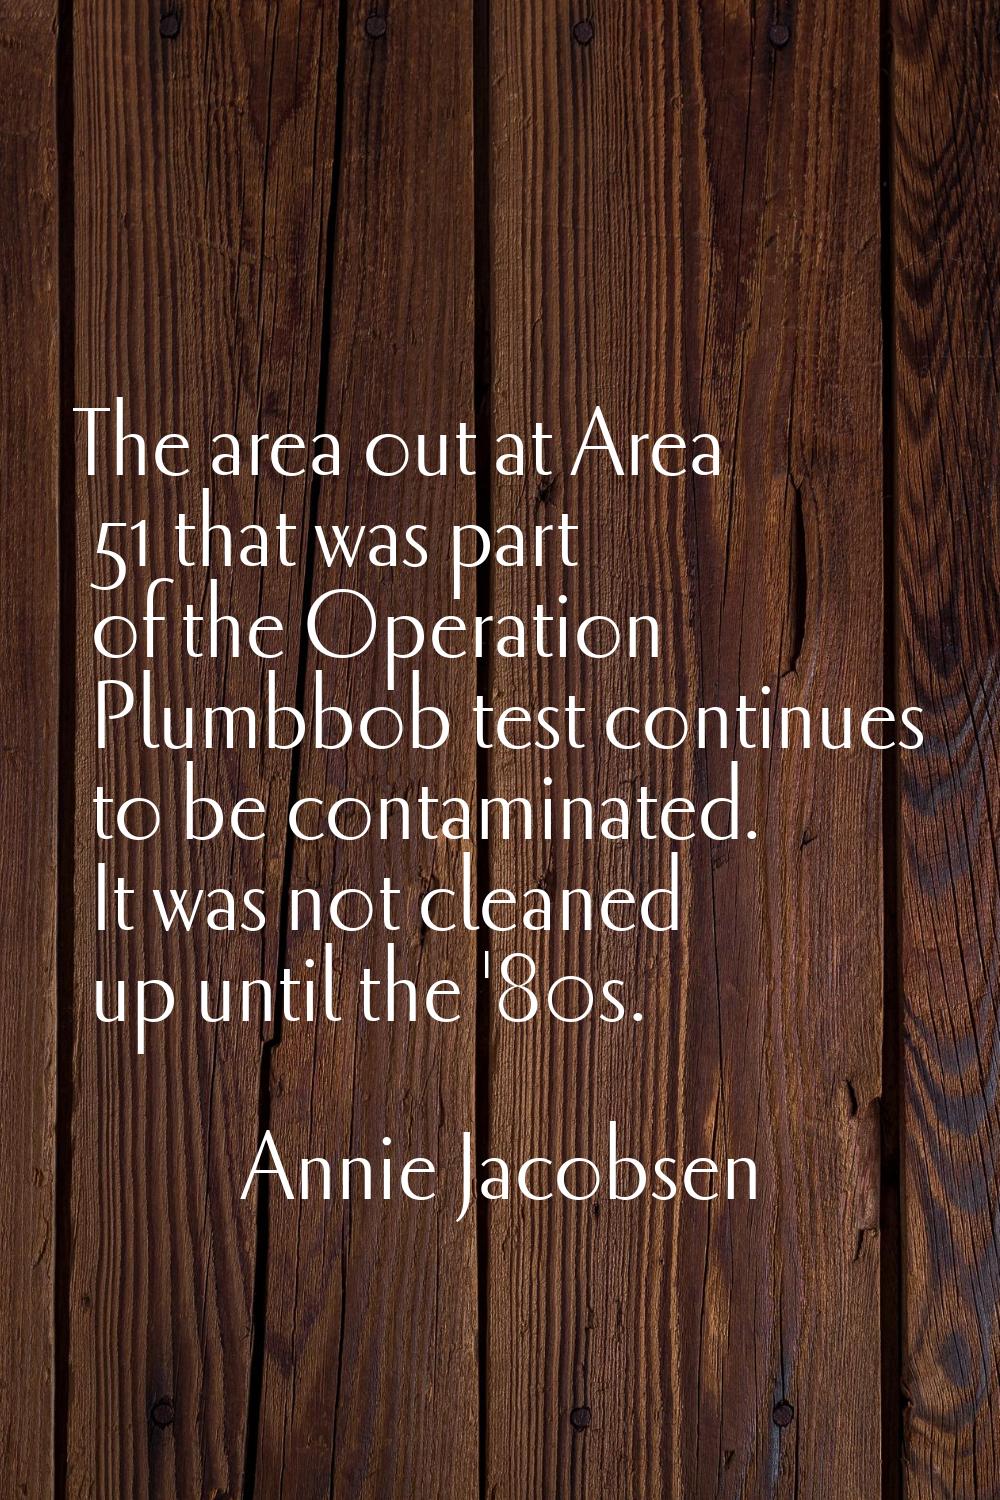 The area out at Area 51 that was part of the Operation Plumbbob test continues to be contaminated. 